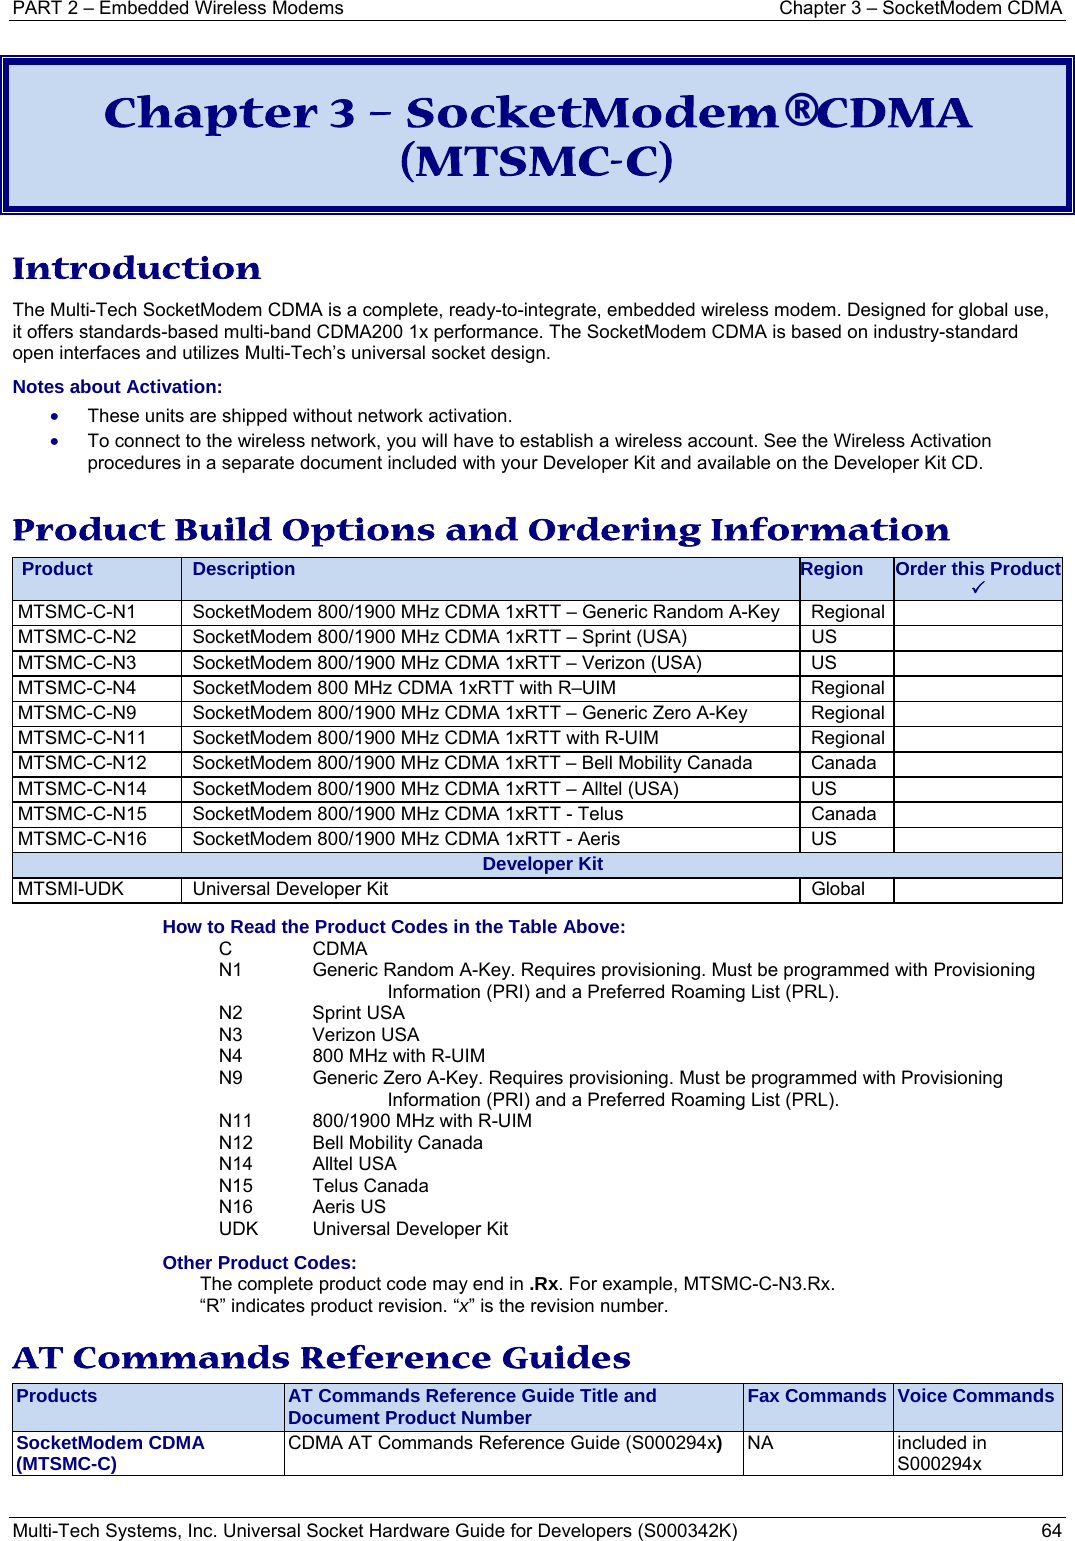 PART 2 – Embedded Wireless Modems  Chapter 3 – SocketModem CDMA  Multi-Tech Systems, Inc. Universal Socket Hardware Guide for Developers (S000342K)  64  Chapter 3 – SocketModem® CDMA (MTSMC-C)  Introduction The Multi-Tech SocketModem CDMA is a complete, ready-to-integrate, embedded wireless modem. Designed for global use, it offers standards-based multi-band CDMA200 1x performance. The SocketModem CDMA is based on industry-standard open interfaces and utilizes Multi-Tech’s universal socket design. Notes about Activation:  • These units are shipped without network activation.  • To connect to the wireless network, you will have to establish a wireless account. See the Wireless Activation procedures in a separate document included with your Developer Kit and available on the Developer Kit CD.  Product Build Options and Ordering Information Product  Description  Region  Order this Product3MTSMC-C-N1  SocketModem 800/1900 MHz CDMA 1xRTT – Generic Random A-Key  Regional   MTSMC-C-N2  SocketModem 800/1900 MHz CDMA 1xRTT – Sprint (USA)  US   MTSMC-C-N3  SocketModem 800/1900 MHz CDMA 1xRTT – Verizon (USA)    US   MTSMC-C-N4  SocketModem 800 MHz CDMA 1xRTT with R–UIM   Regional   MTSMC-C-N9  SocketModem 800/1900 MHz CDMA 1xRTT – Generic Zero A-Key  Regional   MTSMC-C-N11  SocketModem 800/1900 MHz CDMA 1xRTT with R-UIM    Regional   MTSMC-C-N12  SocketModem 800/1900 MHz CDMA 1xRTT – Bell Mobility Canada   Canada   MTSMC-C-N14  SocketModem 800/1900 MHz CDMA 1xRTT – Alltel (USA)  US   MTSMC-C-N15  SocketModem 800/1900 MHz CDMA 1xRTT - Telus  Canada MTSMC-C-N16  SocketModem 800/1900 MHz CDMA 1xRTT - Aeris  US   Developer KitMTSMI-UDK  Universal Developer Kit  Global How to Read the Product Codes in the Table Above: C CDMA N1  Generic Random A-Key. Requires provisioning. Must be programmed with Provisioning Information (PRI) and a Preferred Roaming List (PRL). N2 Sprint USA  N3  Verizon USA  N4  800 MHz with R-UIM  N9  Generic Zero A-Key. Requires provisioning. Must be programmed with Provisioning Information (PRI) and a Preferred Roaming List (PRL). N11  800/1900 MHz with R-UIM  N12  Bell Mobility Canada N14 Alltel USA N15 Telus Canada N16 Aeris US UDK  Universal Developer Kit Other Product Codes: The complete product code may end in .Rx. For example, MTSMC-C-N3.Rx.  “R” indicates product revision. “x” is the revision number. AT Commands Reference Guides Products  AT Commands Reference Guide Title and Document Product Number  Fax Commands  Voice CommandsSocketModem CDMA  (MTSMC-C)  CDMA AT Commands Reference Guide (S000294x) NA included in S000294x   